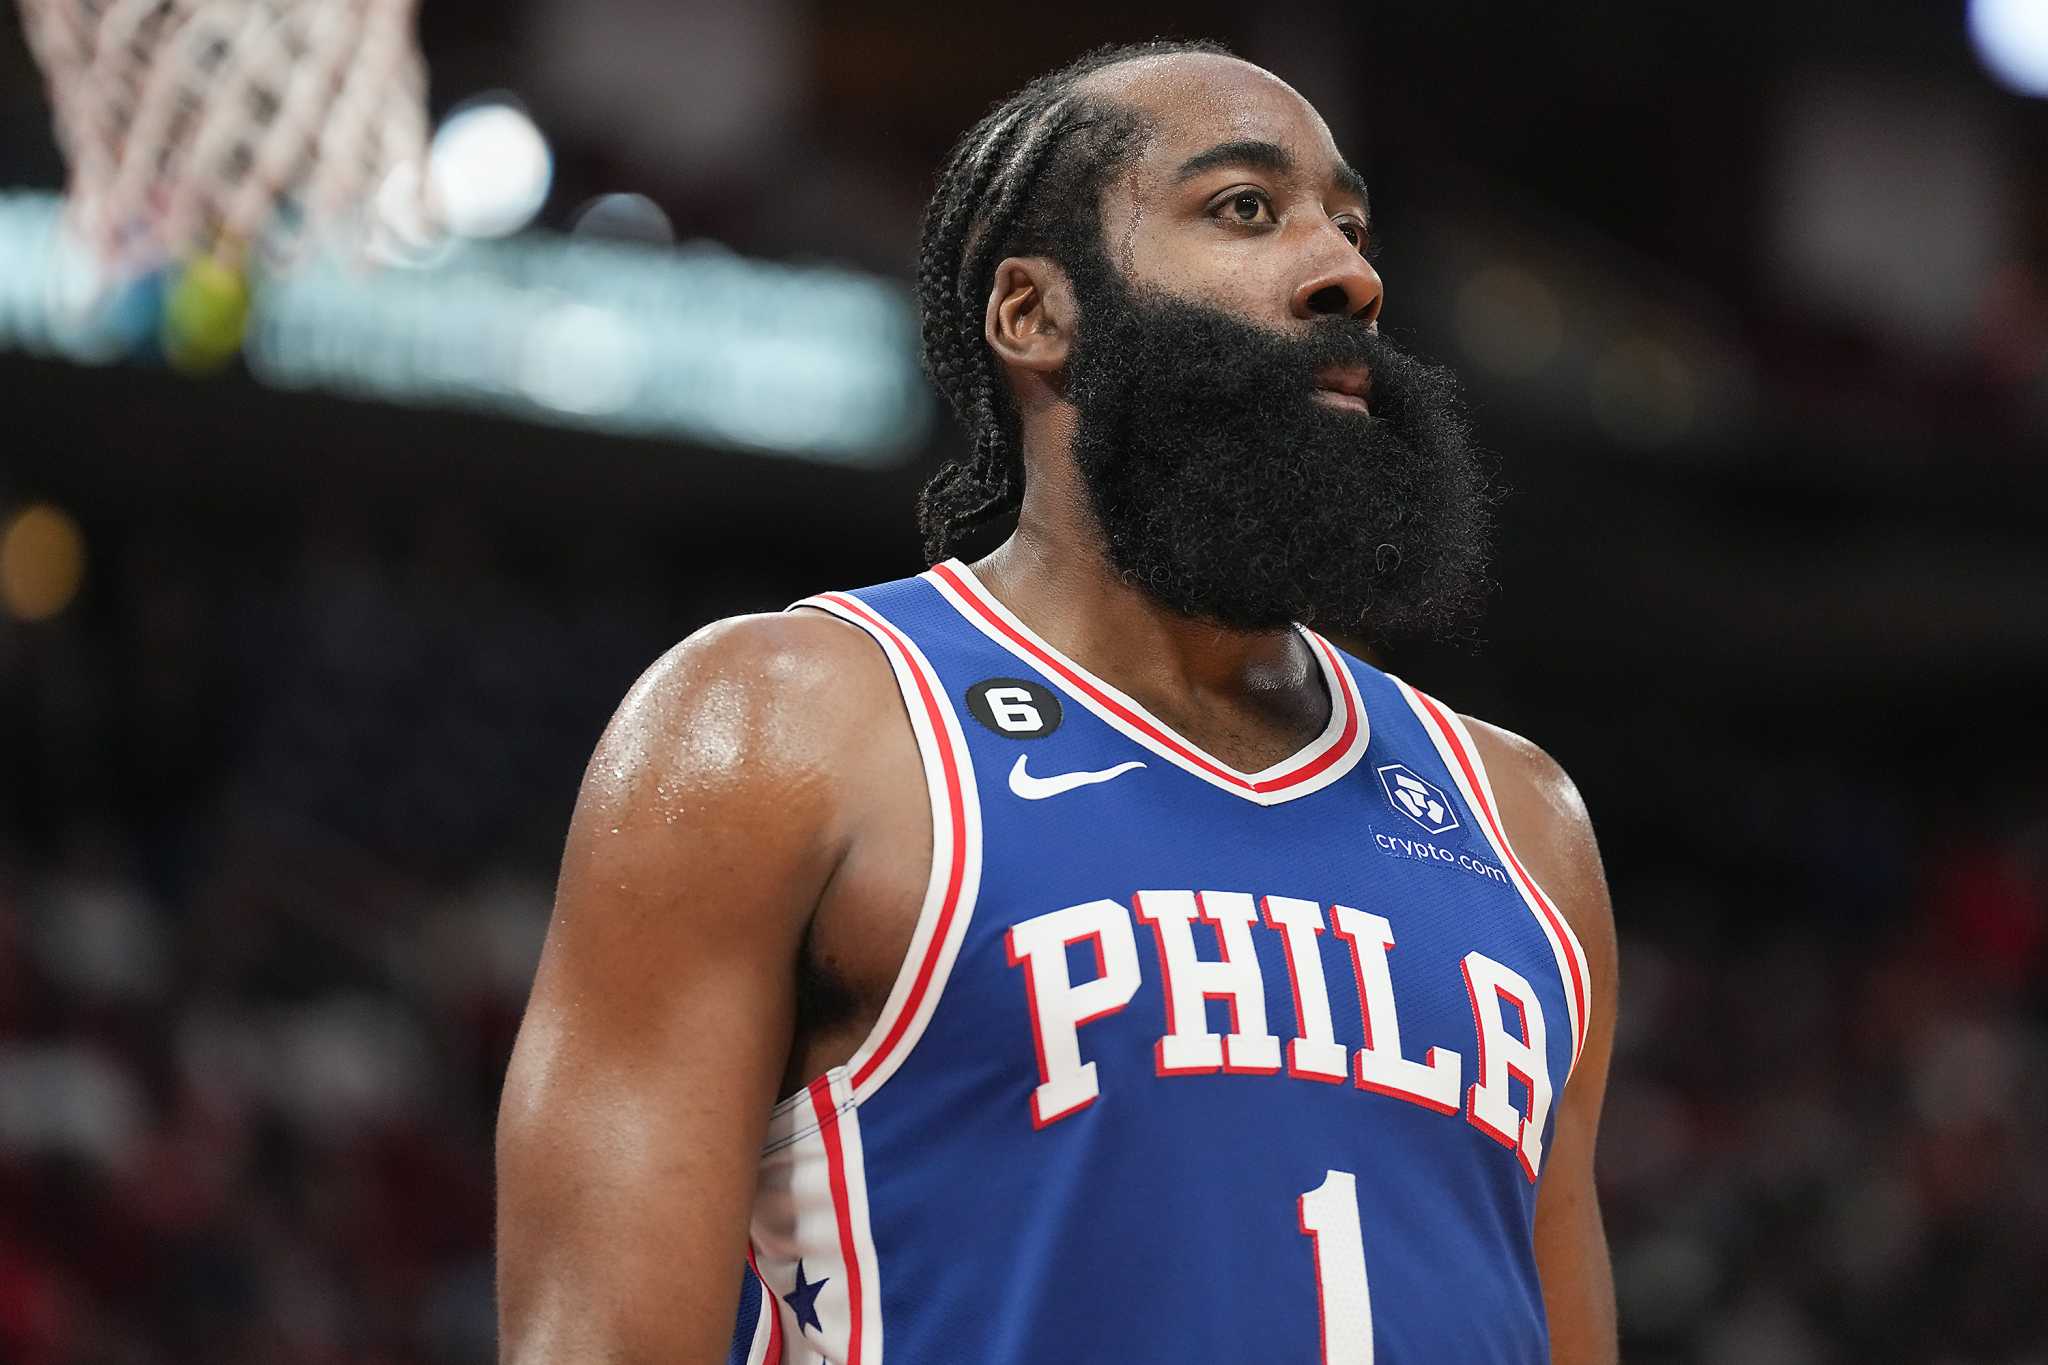 Every player in Philadelphia 76ers history who has worn No. 11